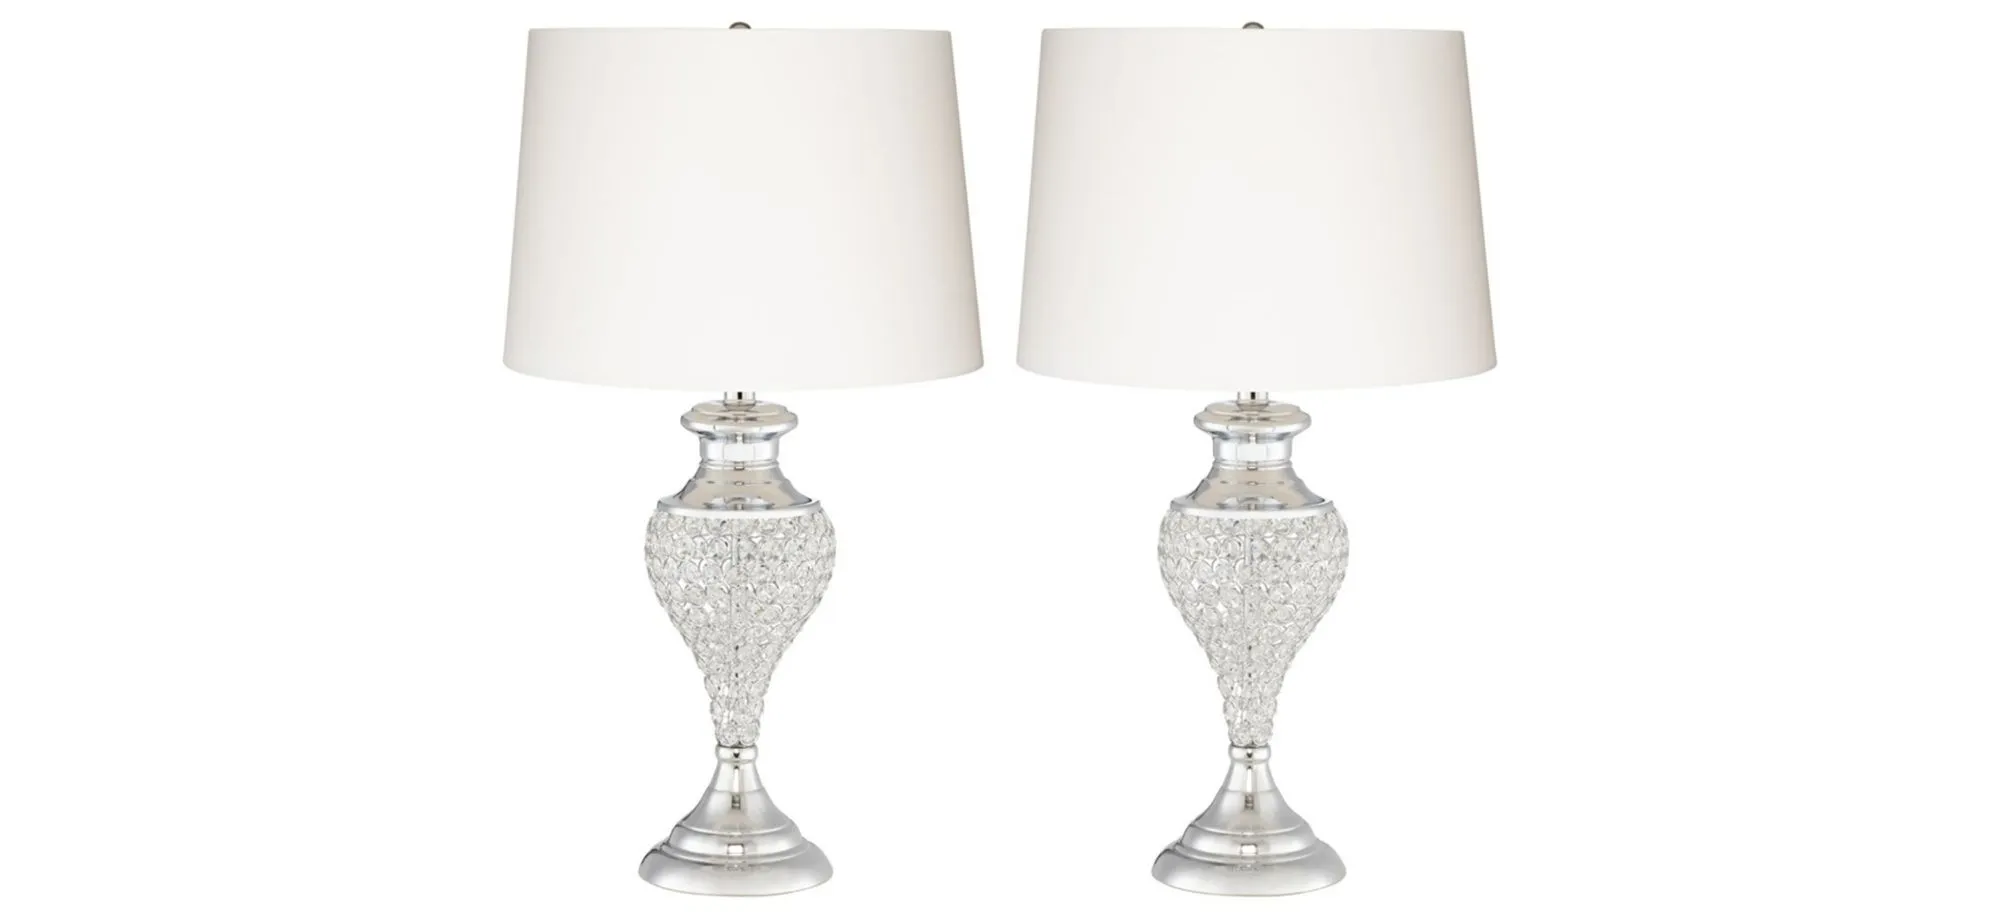 Glitz and Glam Table Lamp: Set of 2 in Polished Chrome by Pacific Coast